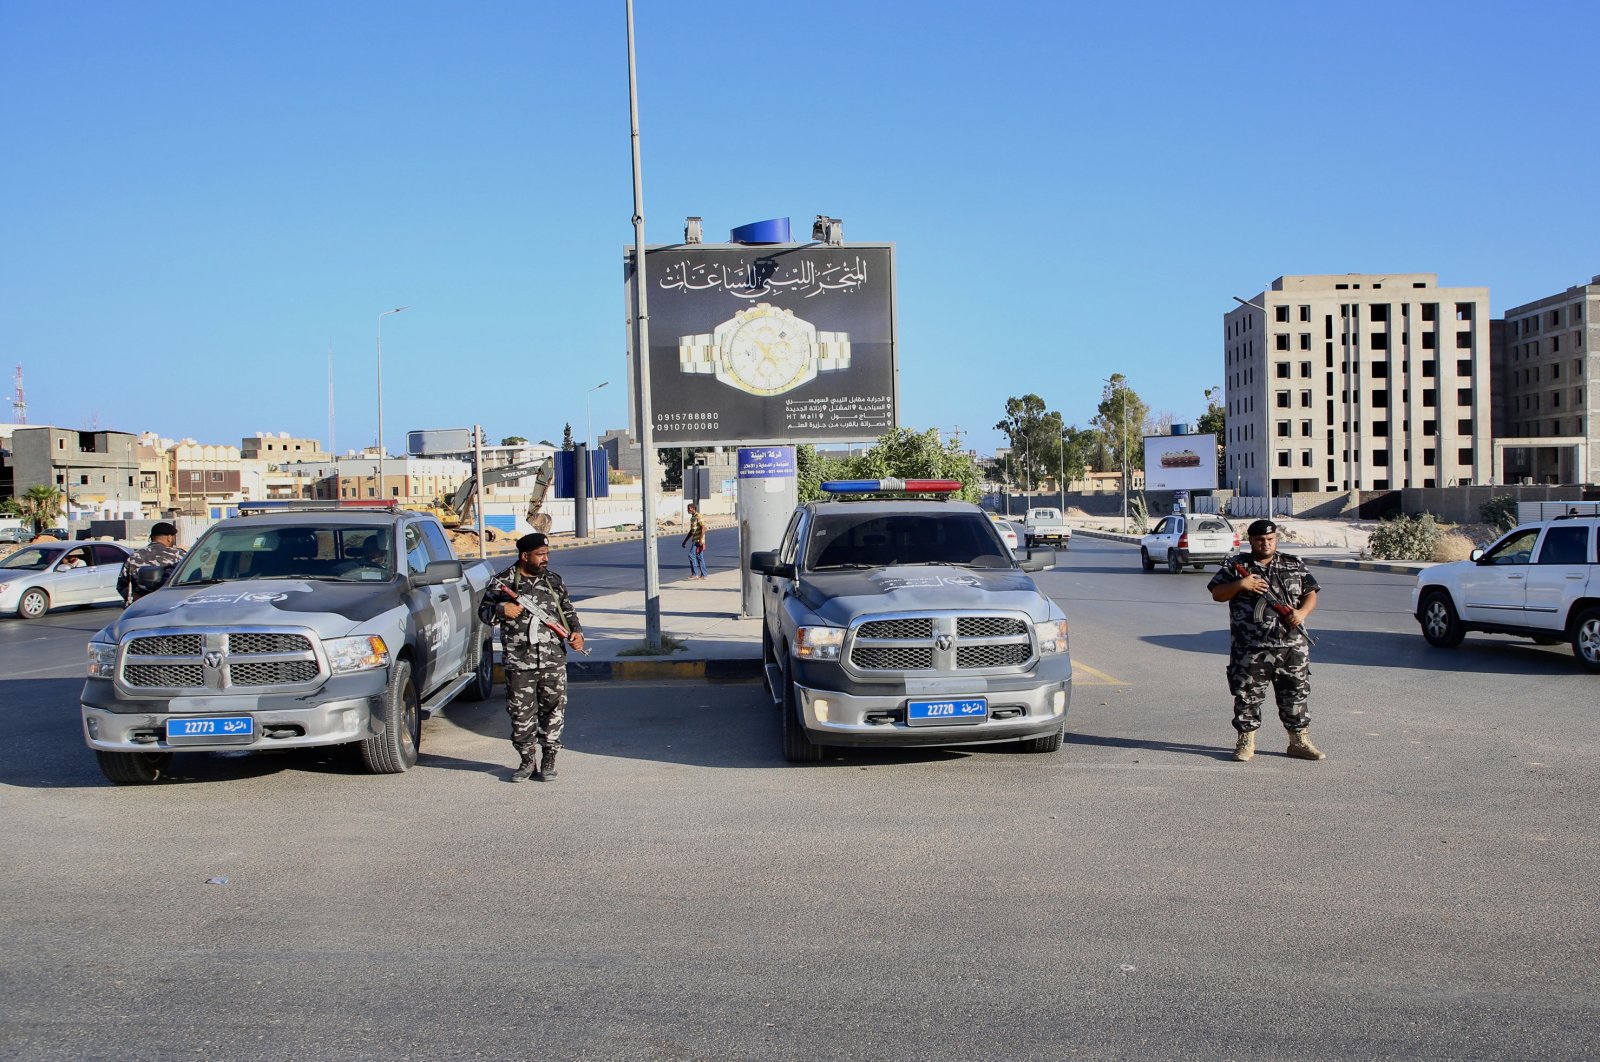 Libya’s central bank reunifies after nearly 10 years of division